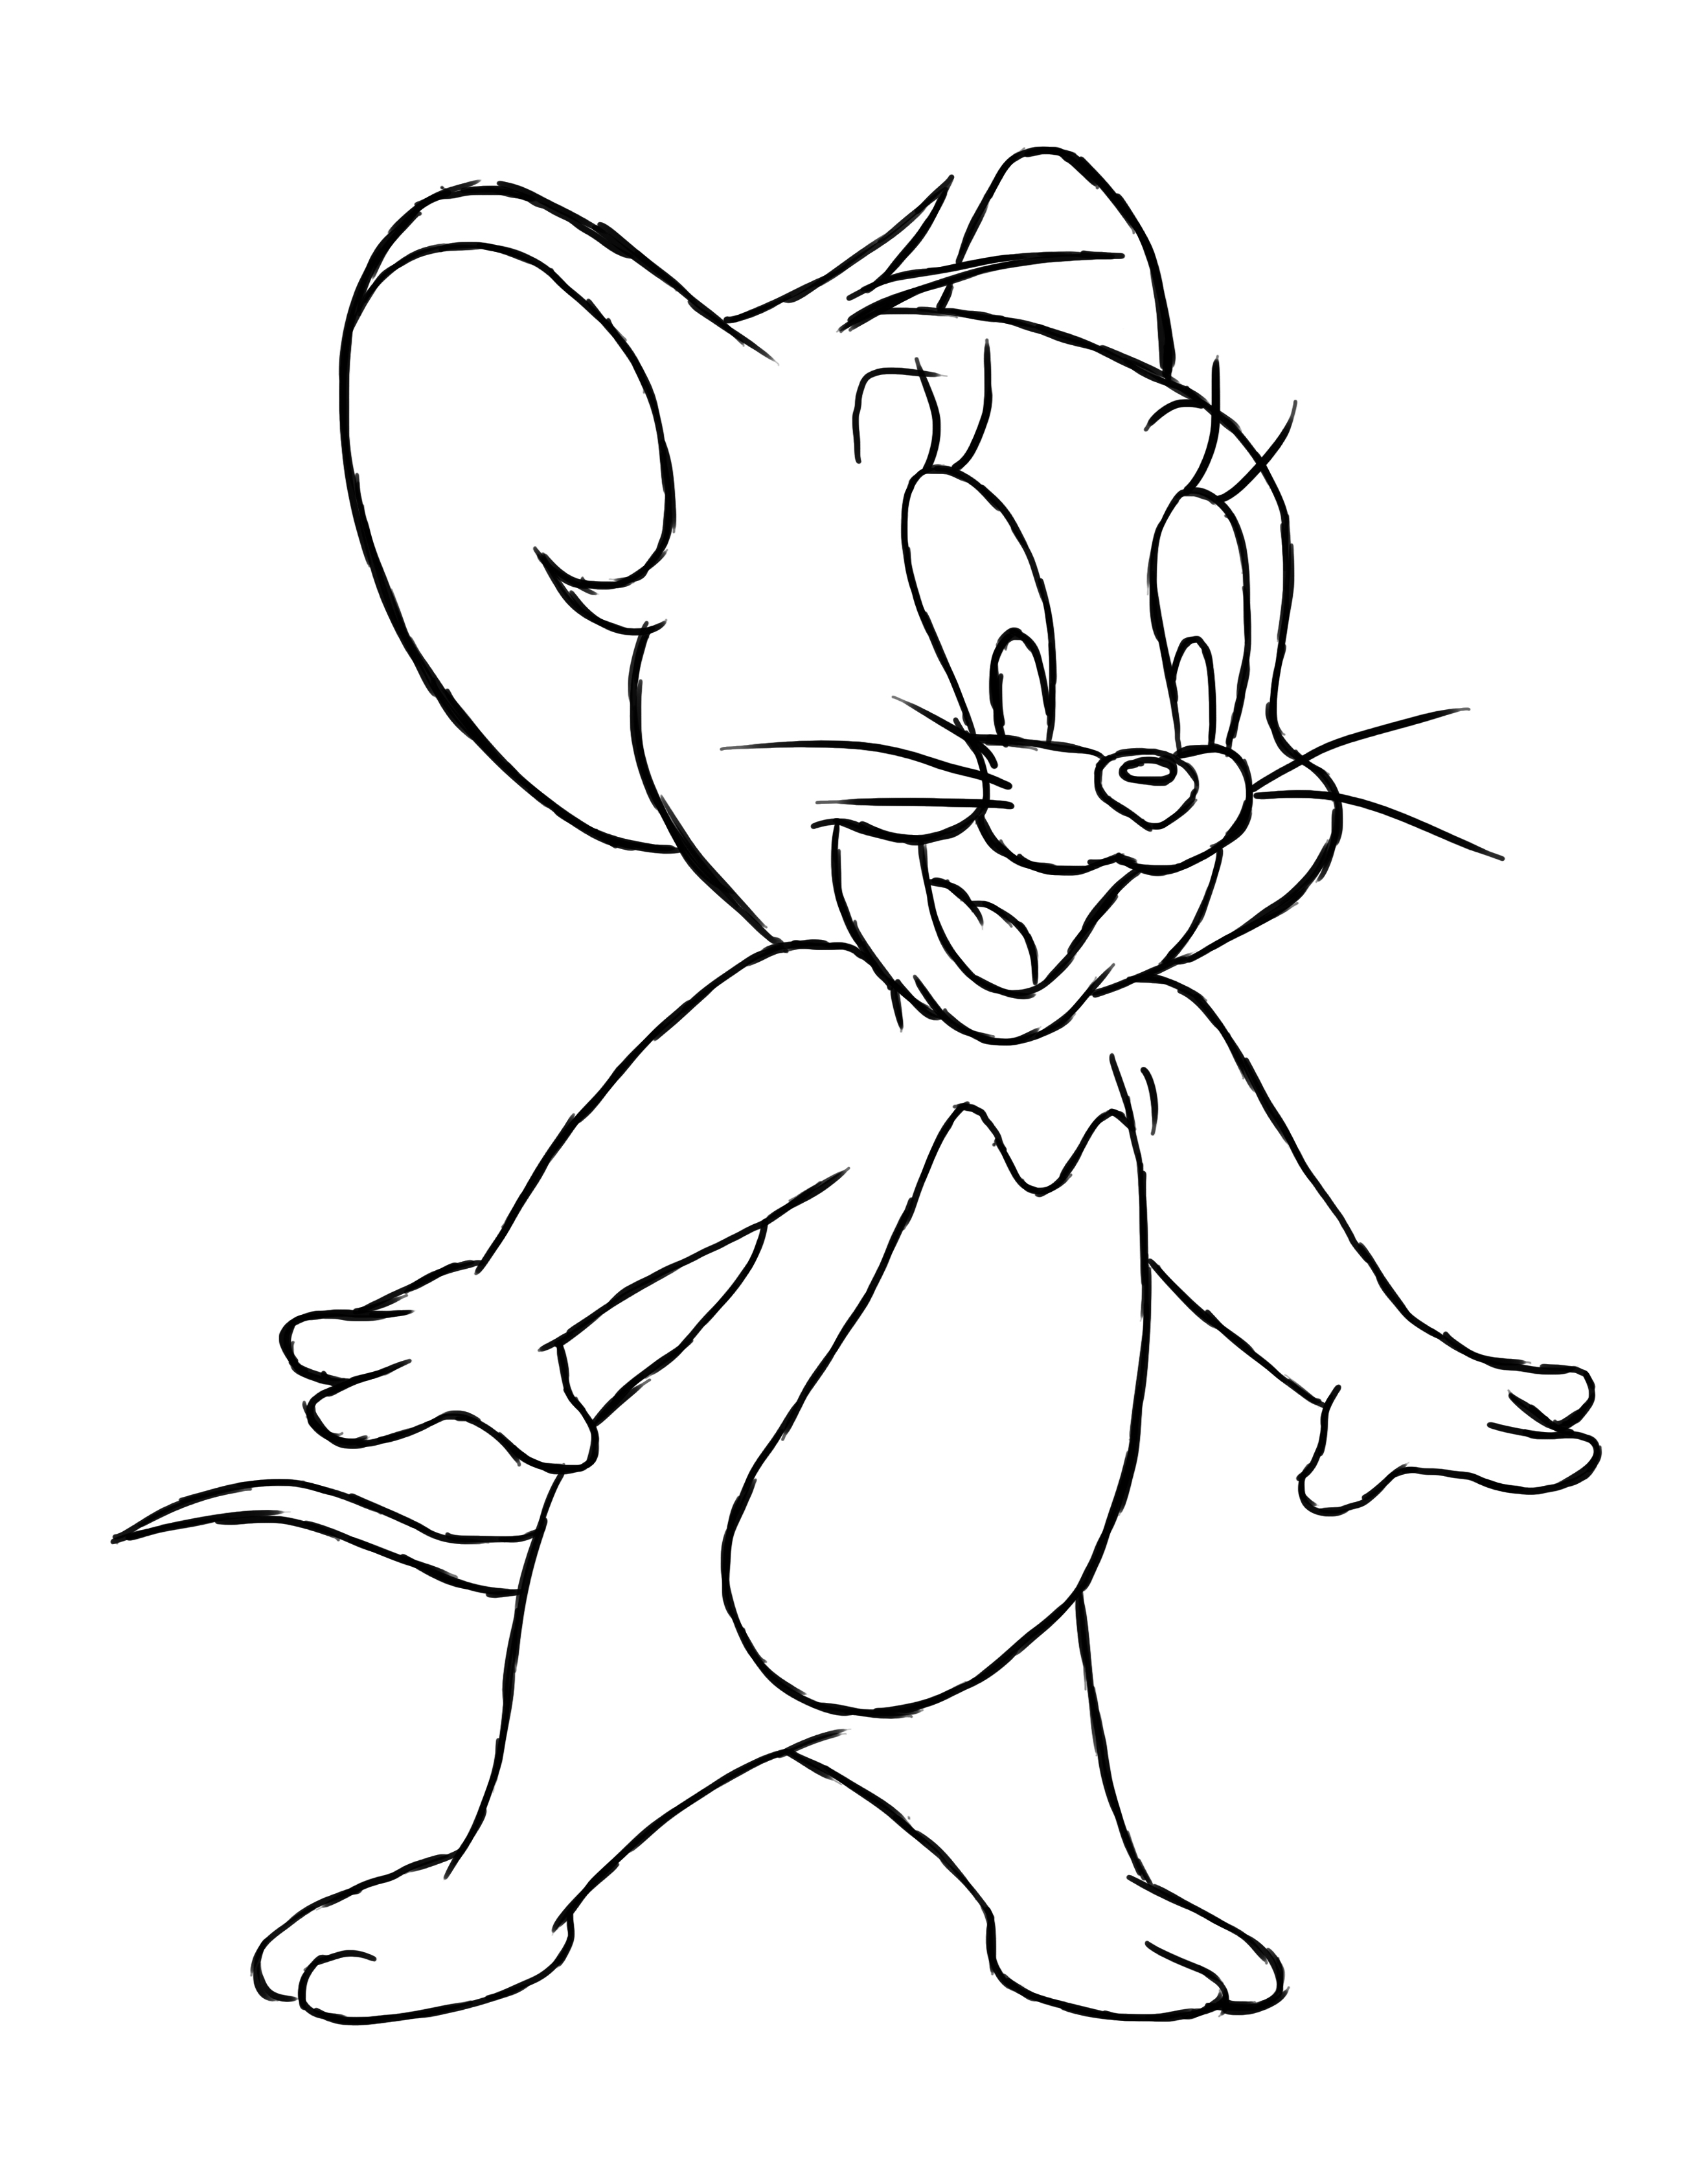 Tom and Jerry coloring pages - ColoringLib